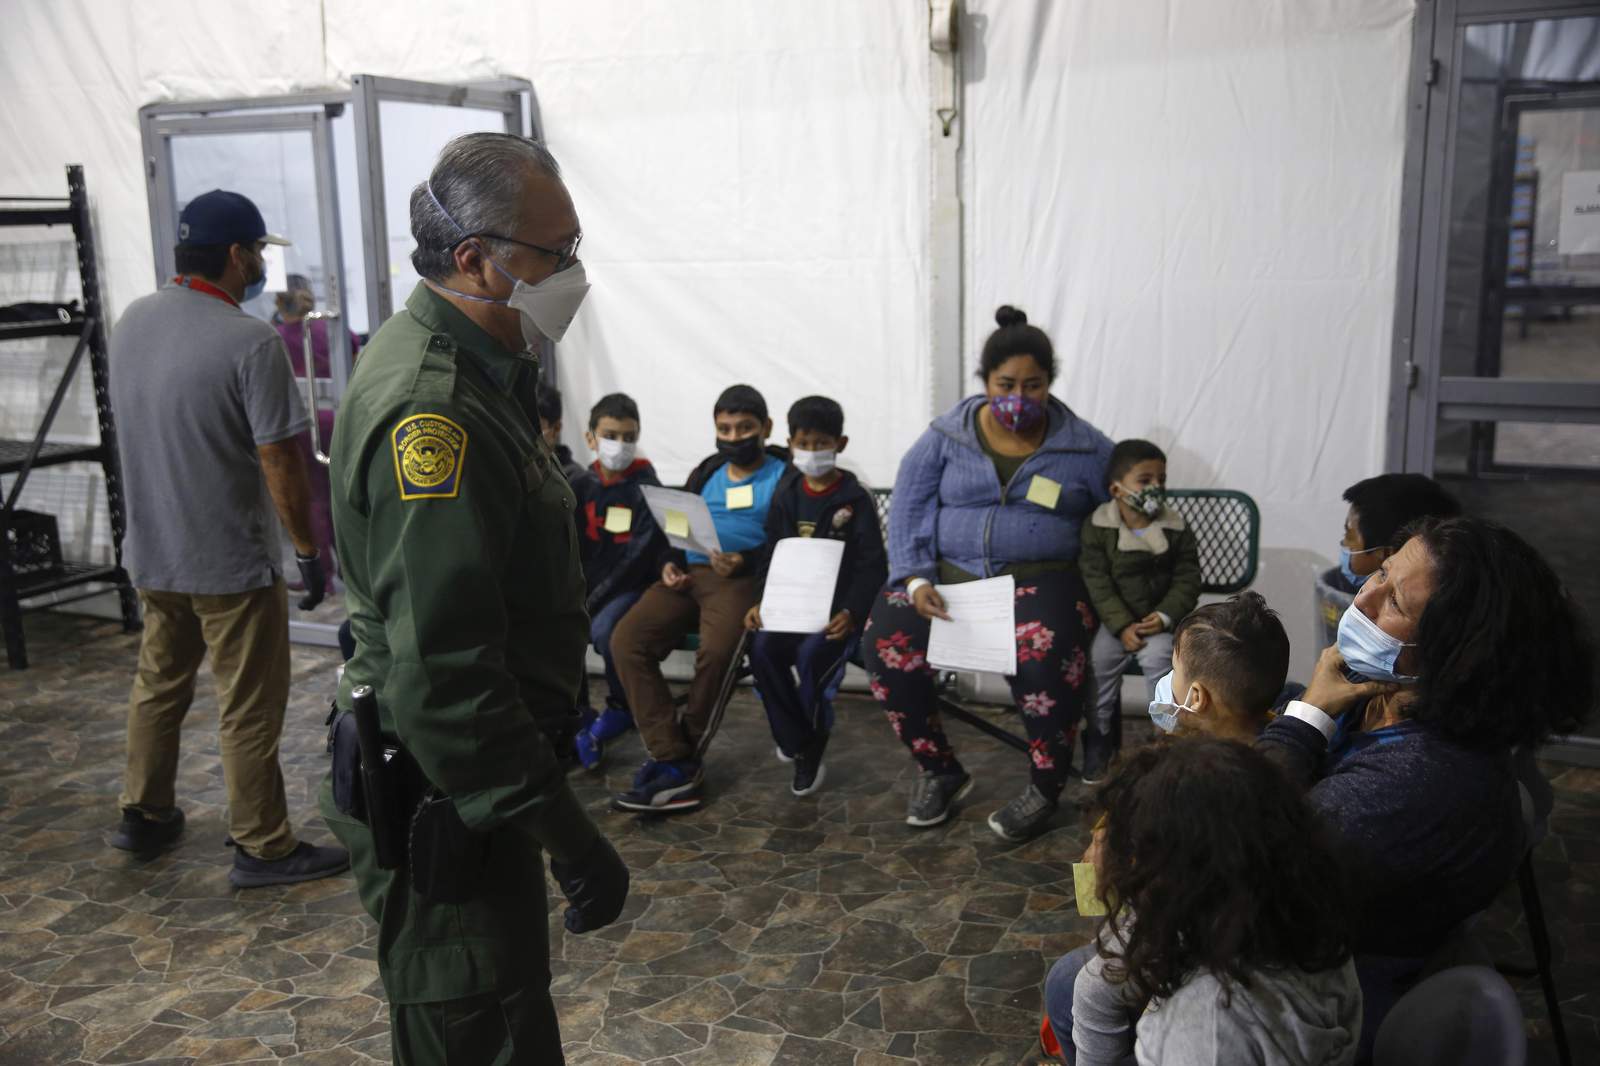 Over 4,000 migrants, many kids, crowded into Texas facility